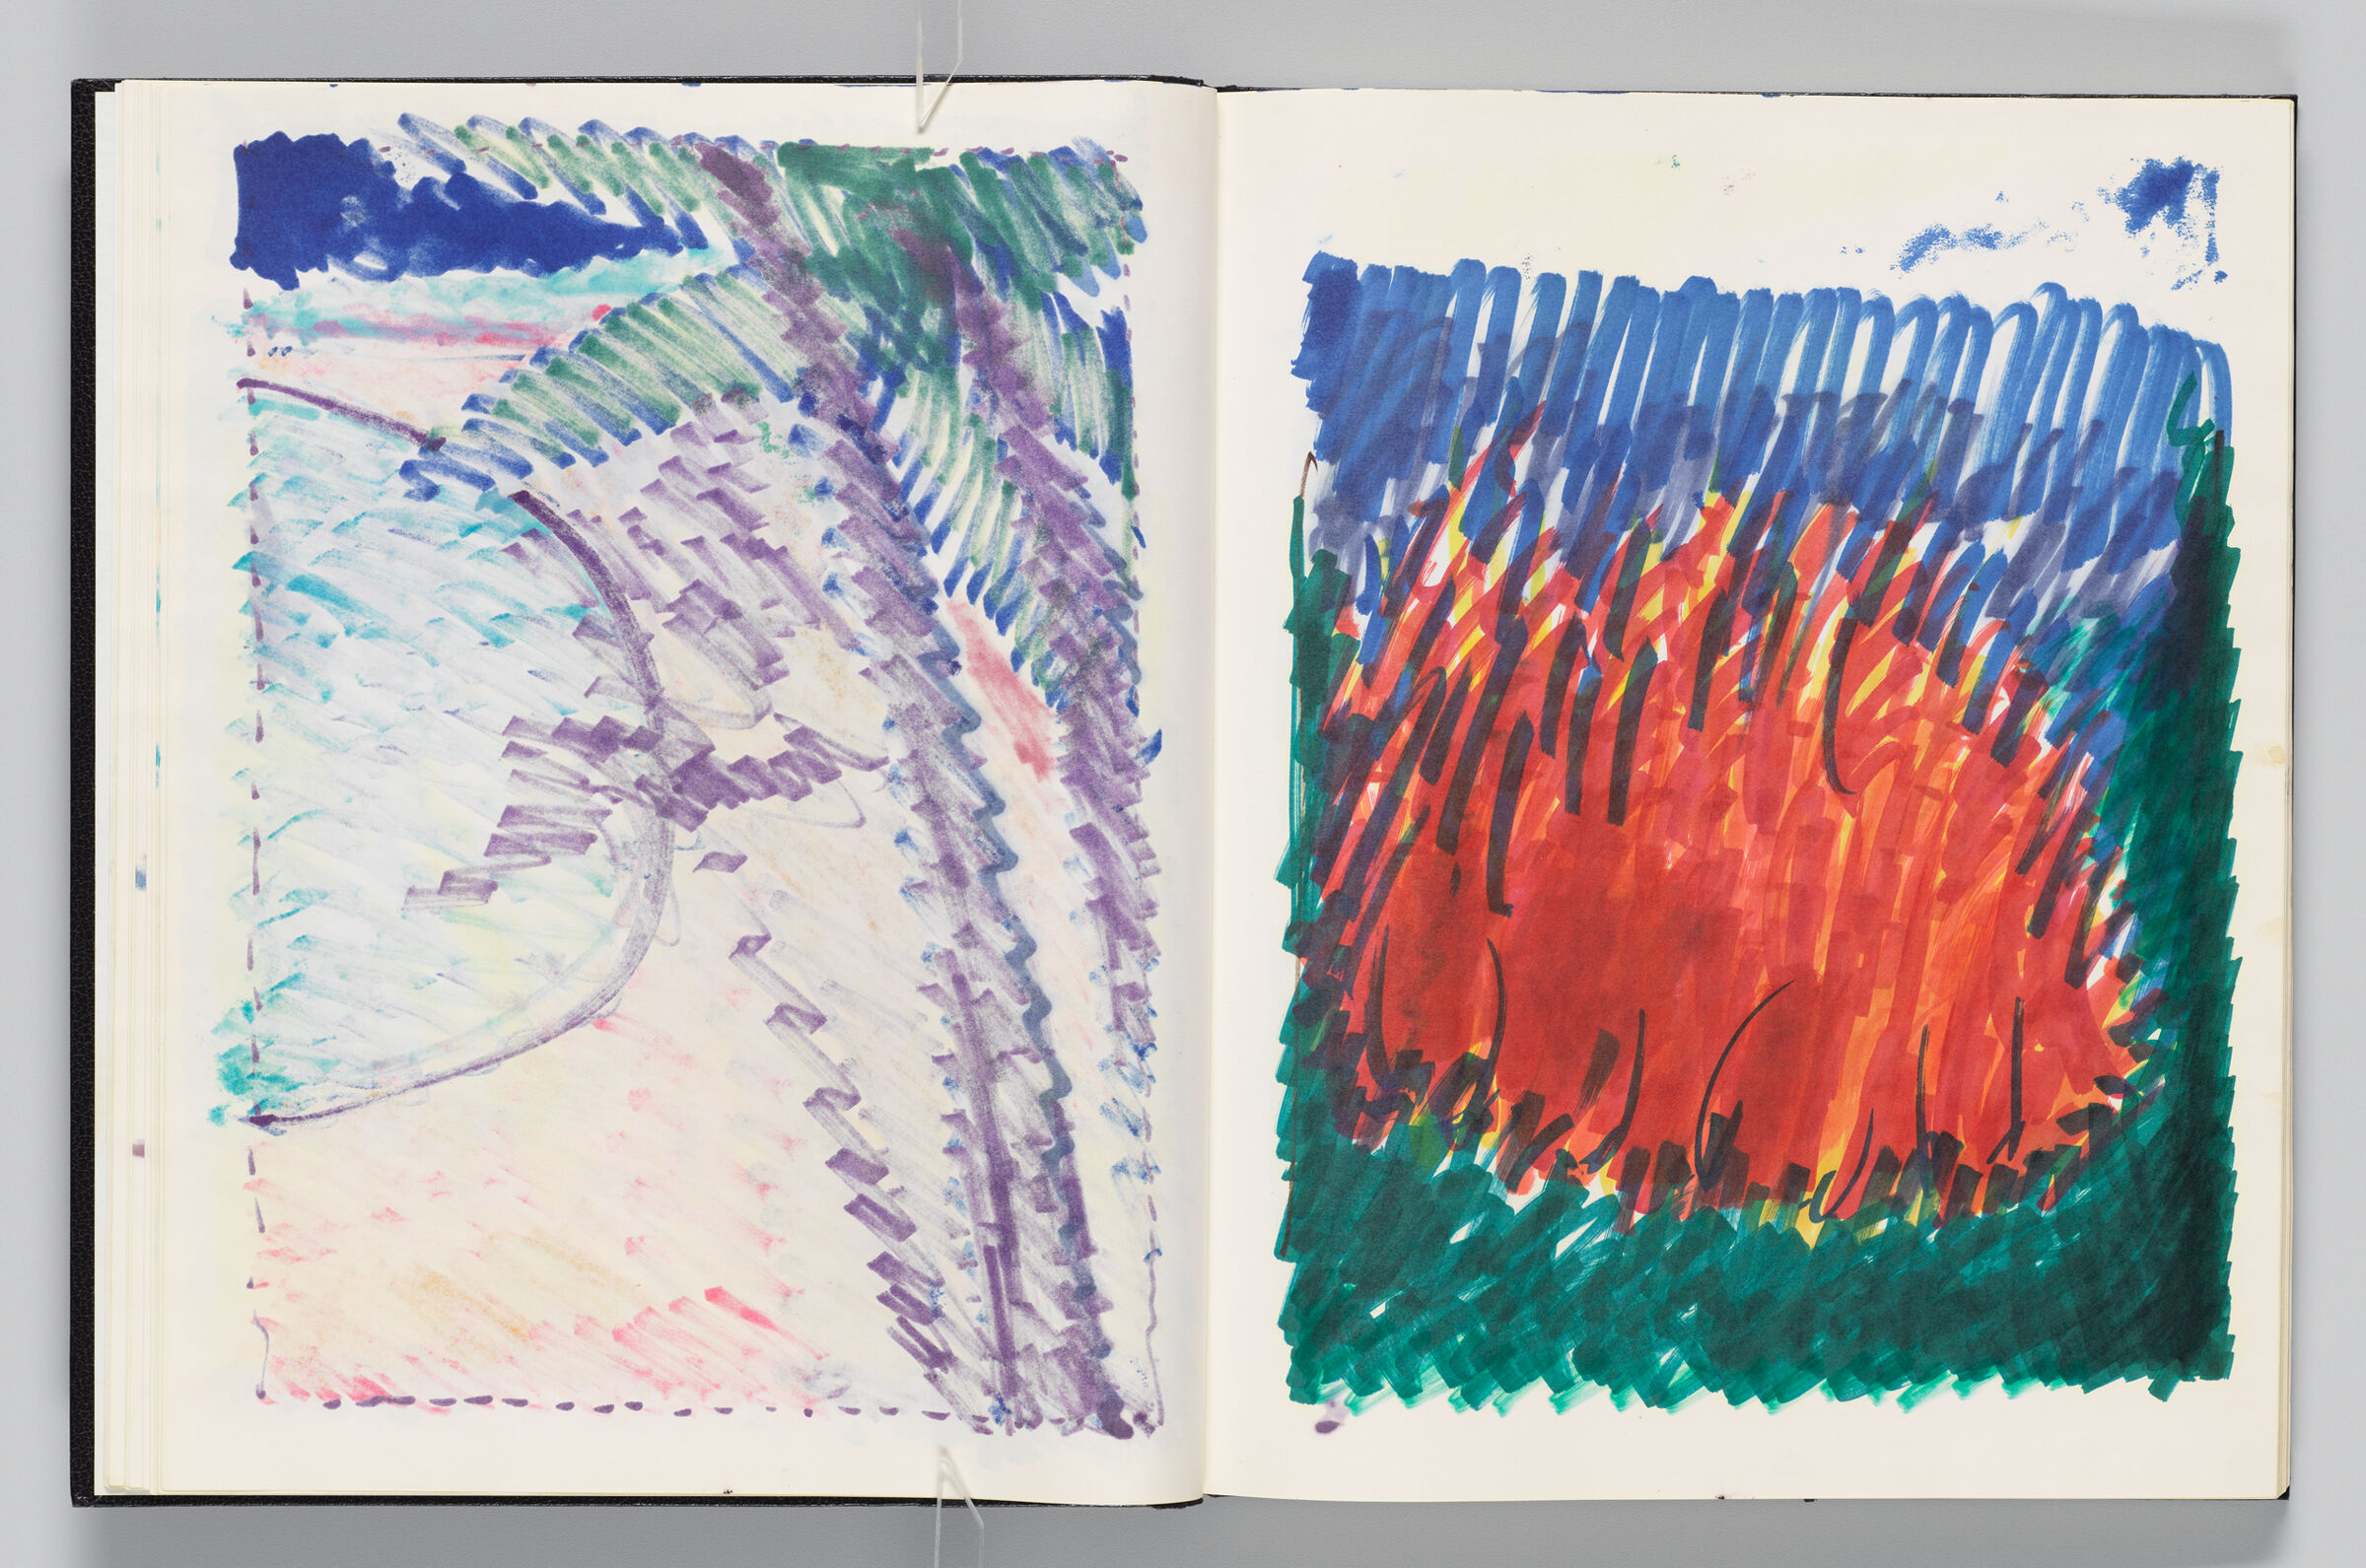 Untitled (Bleed-Through Of Previous Page, Left Page); Untitled (Abstract Landscape, Right Page)